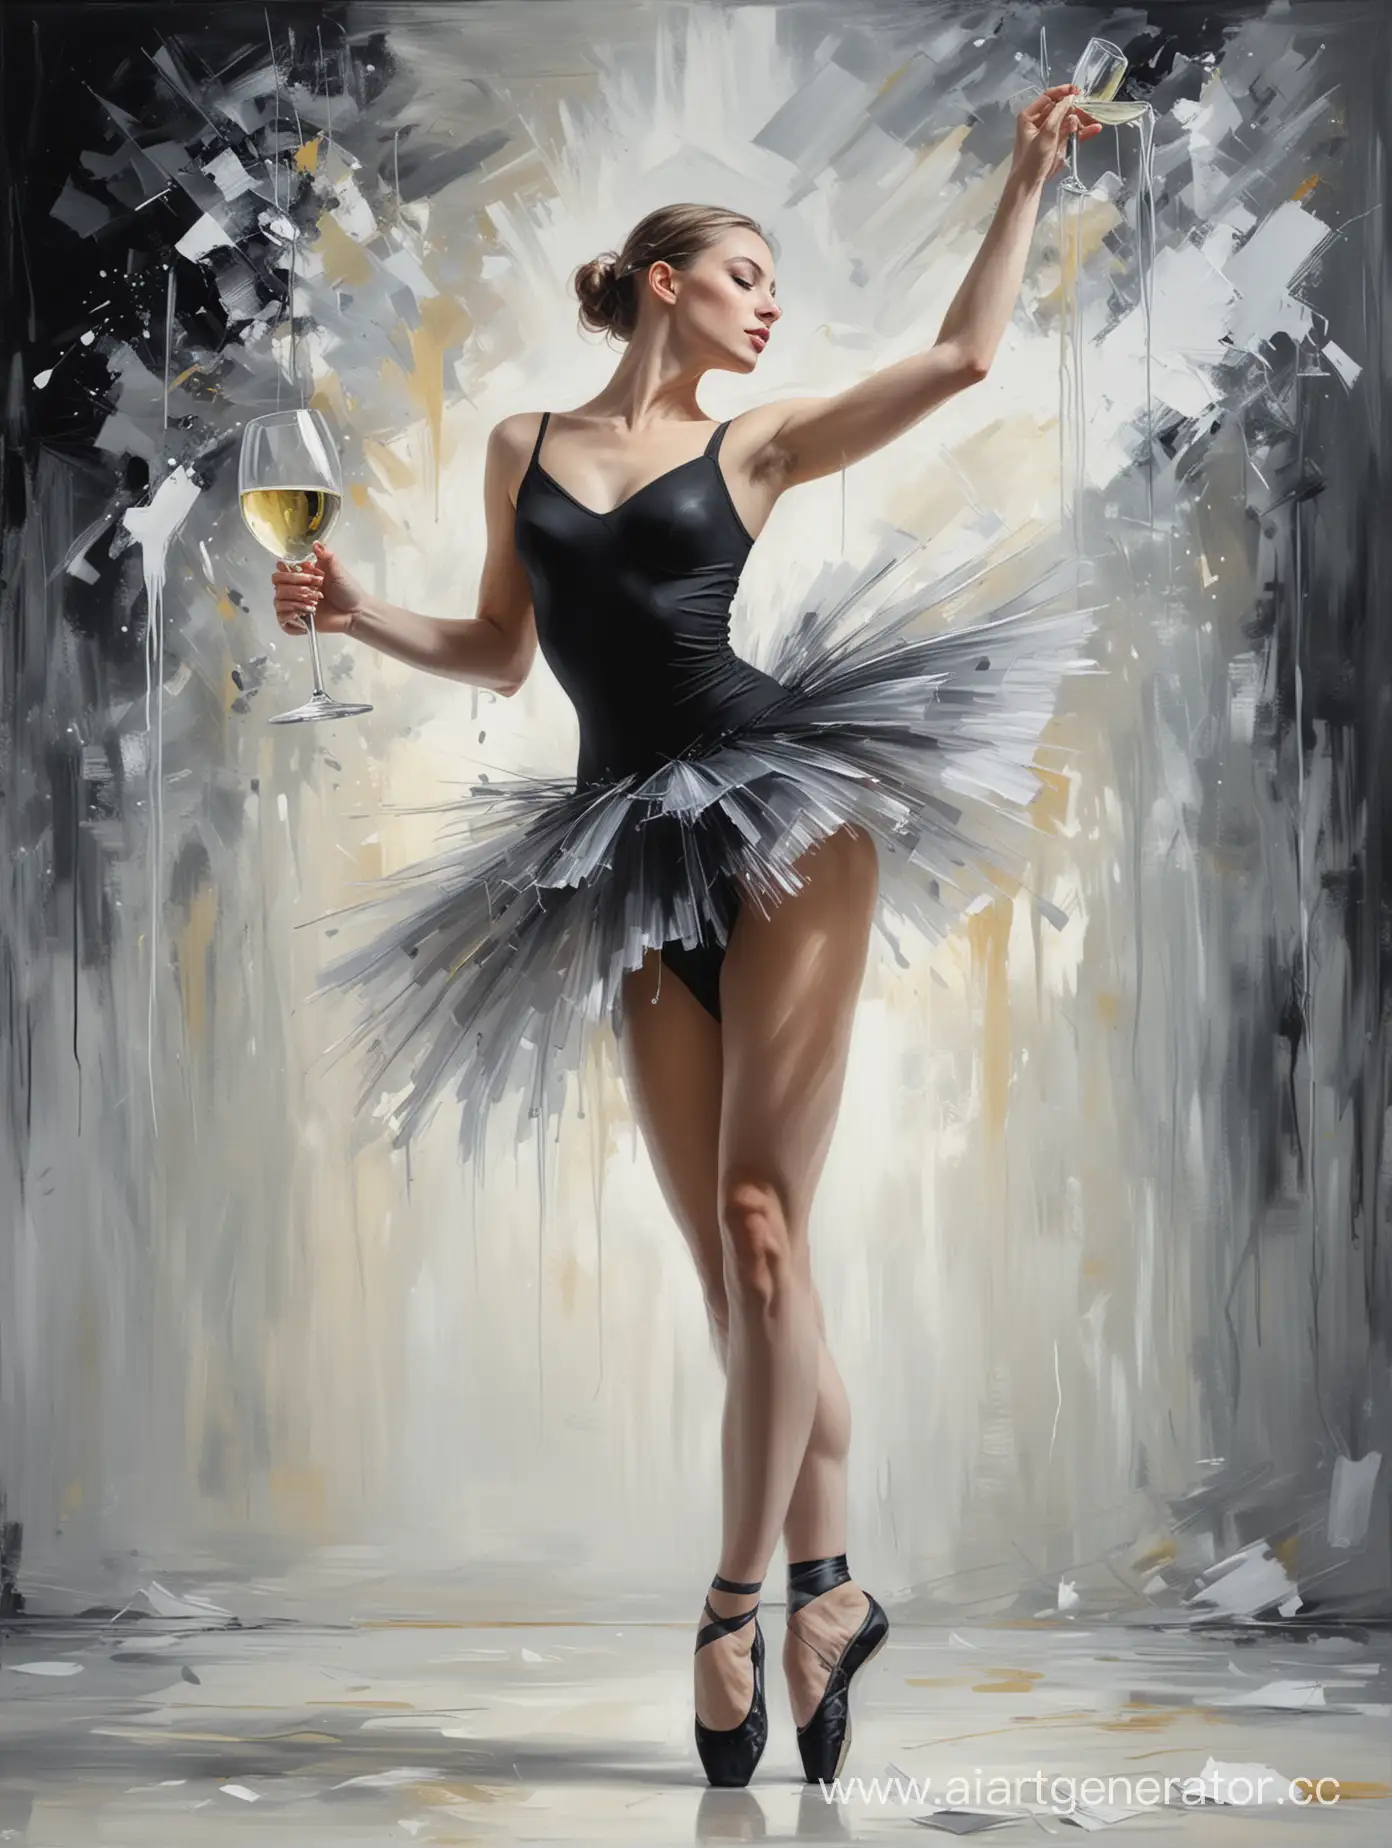 Elegant-Ballerina-Holding-a-Glass-of-White-Wine-in-Black-Attire-Amid-Abstract-Background